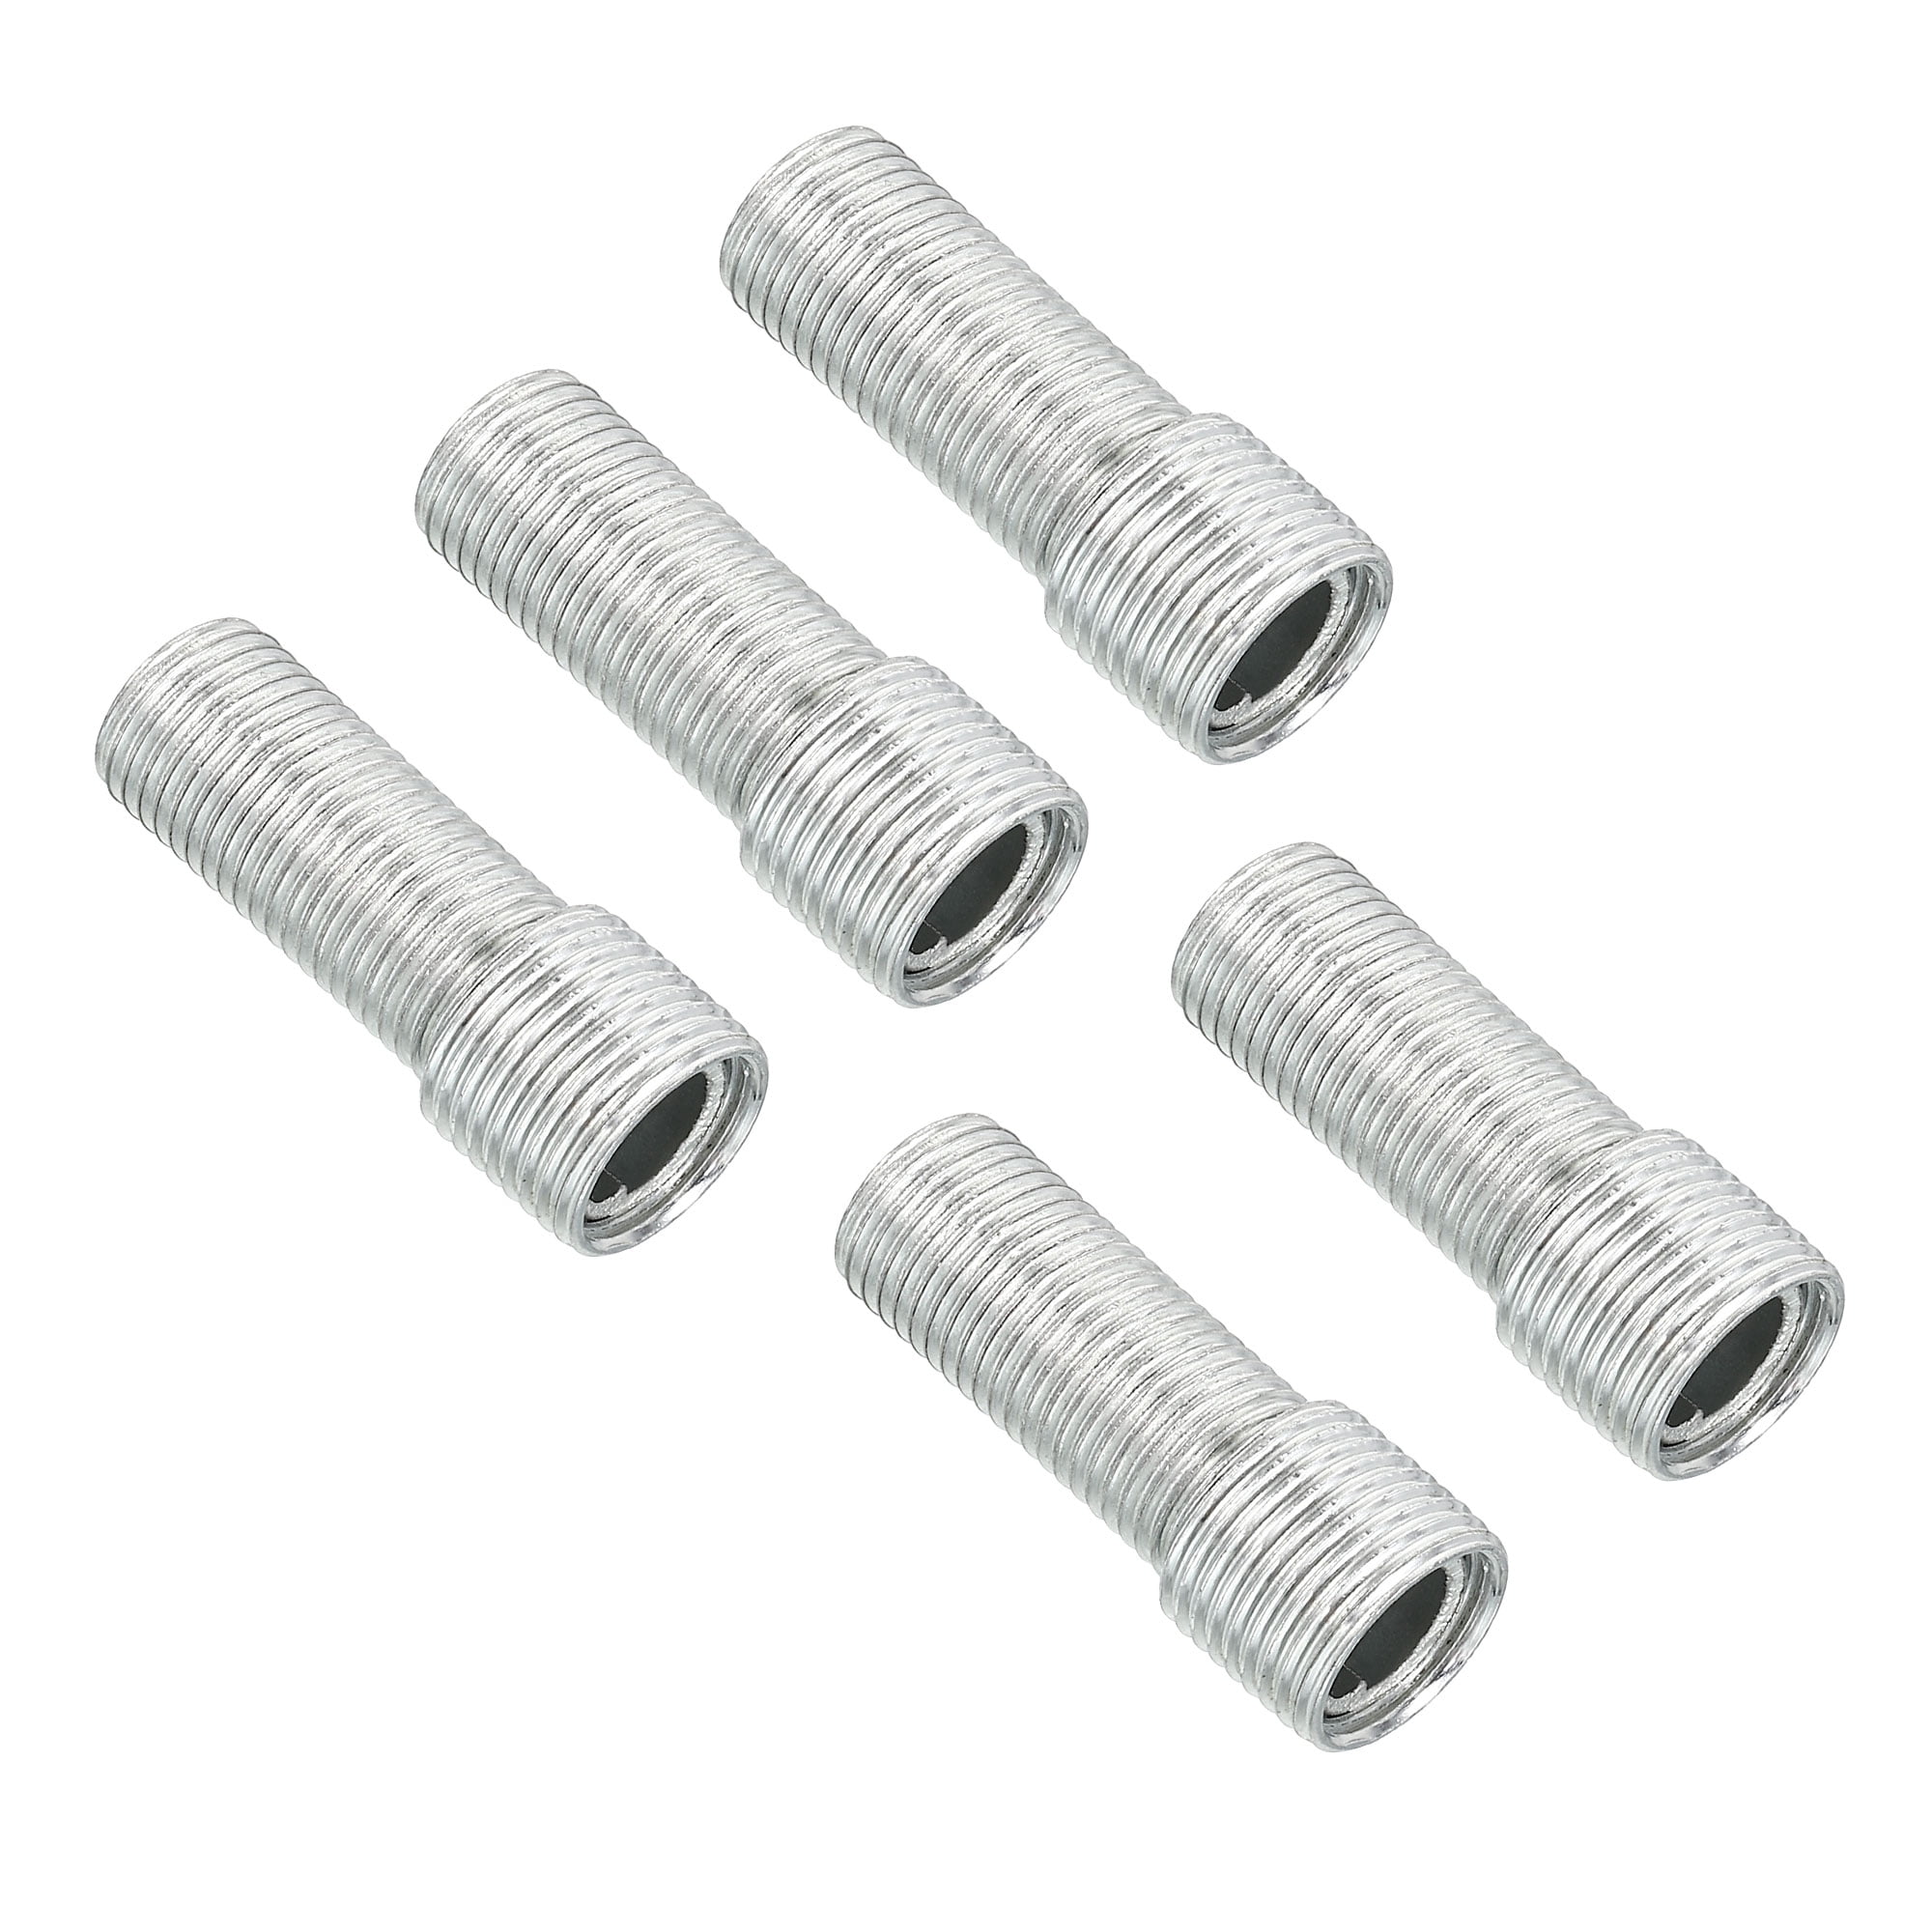 Uxcell M12 to M10 30mm Long Double Male Threaded Reducer Bolt Screw Fitting Adapter 5 Pack, Silver